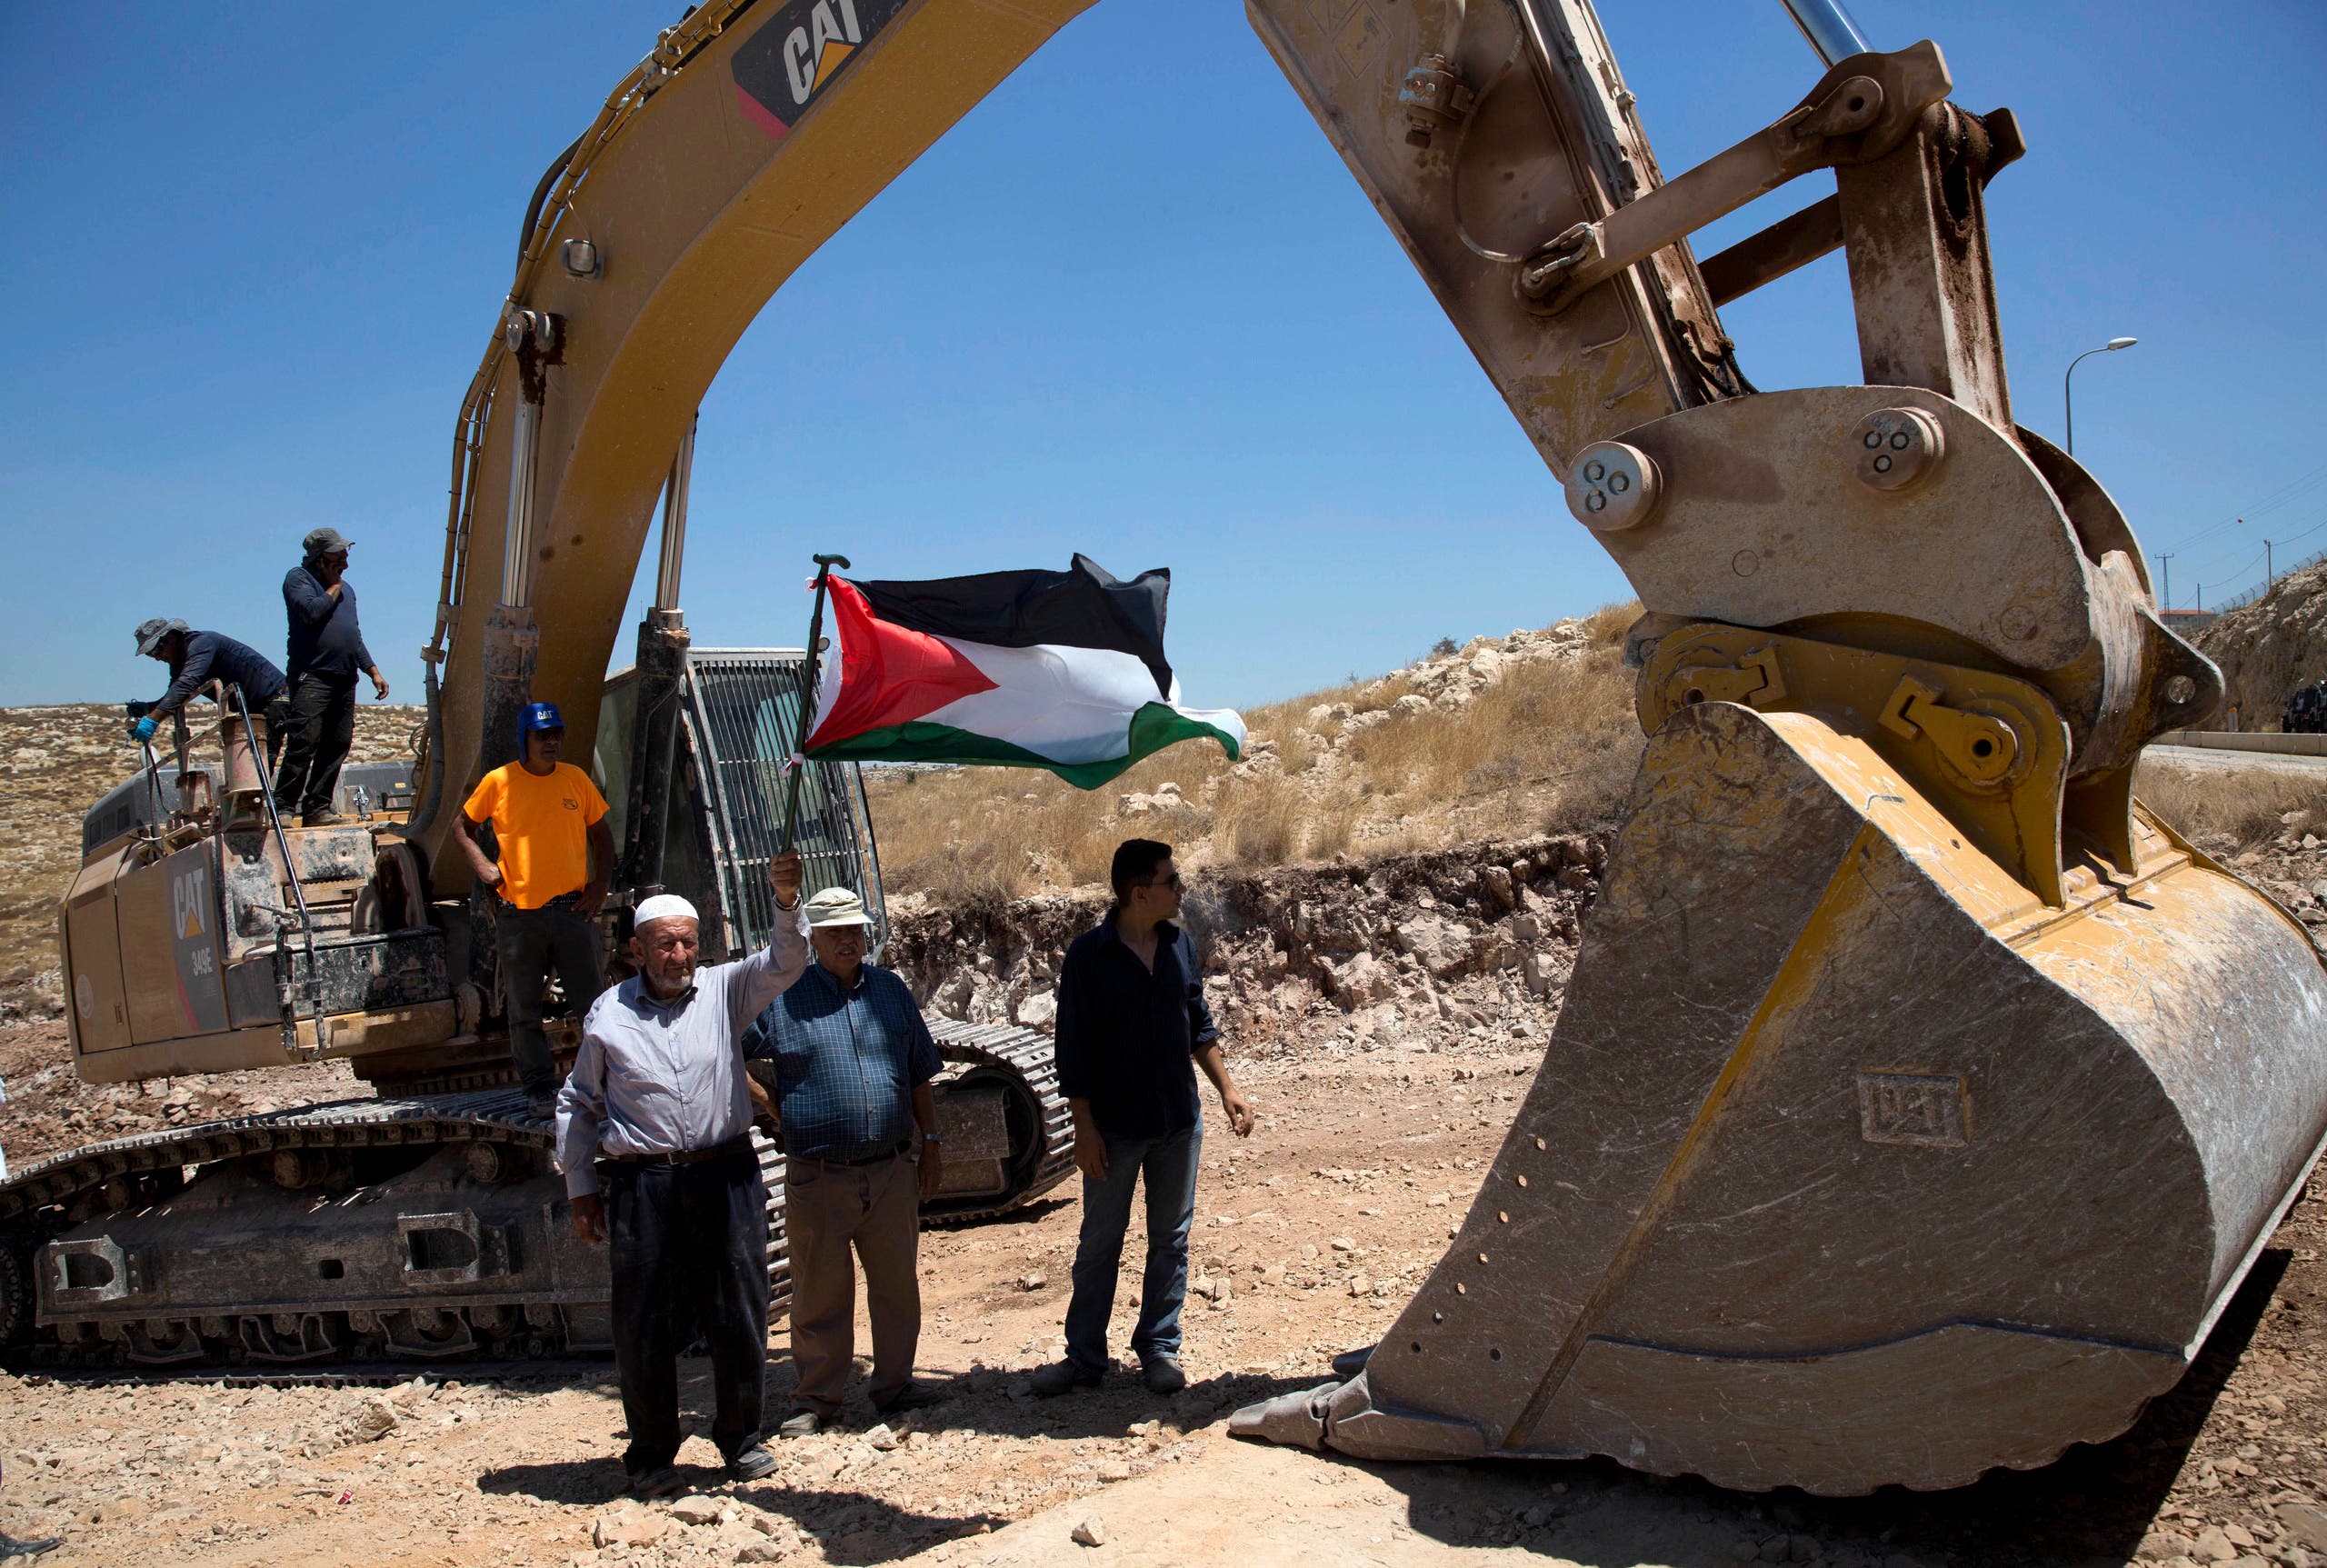 Palestinians demonstrate in front of Israeli bulldozers that were bulldozing land outside Deir Qaddis village near Ramallah for an apparent plan to expand a nearby Jewish settlement. (AP)